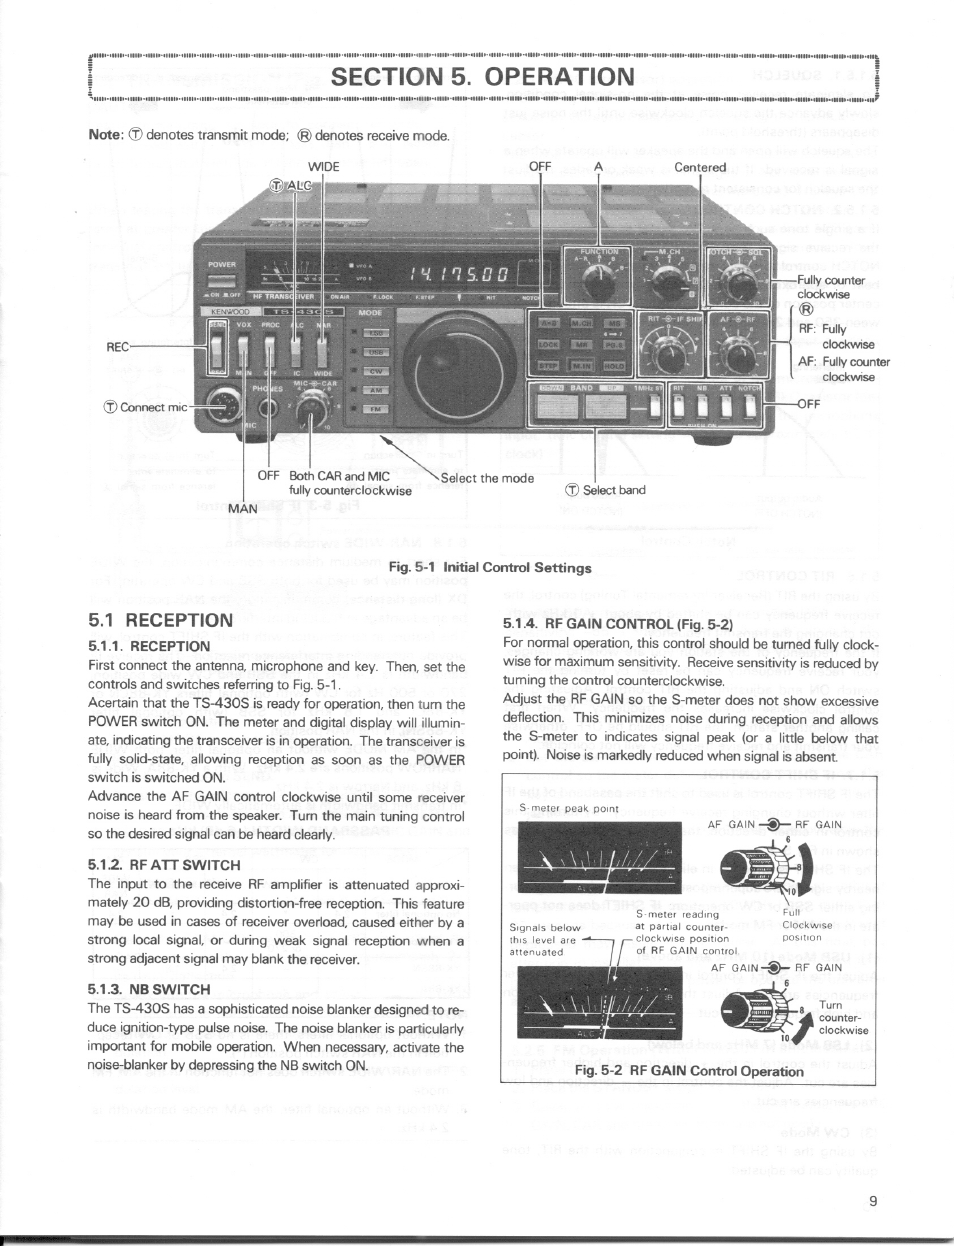 1 reception, Reception | Kenwood TS-430S User Manual | Page 9 / 38